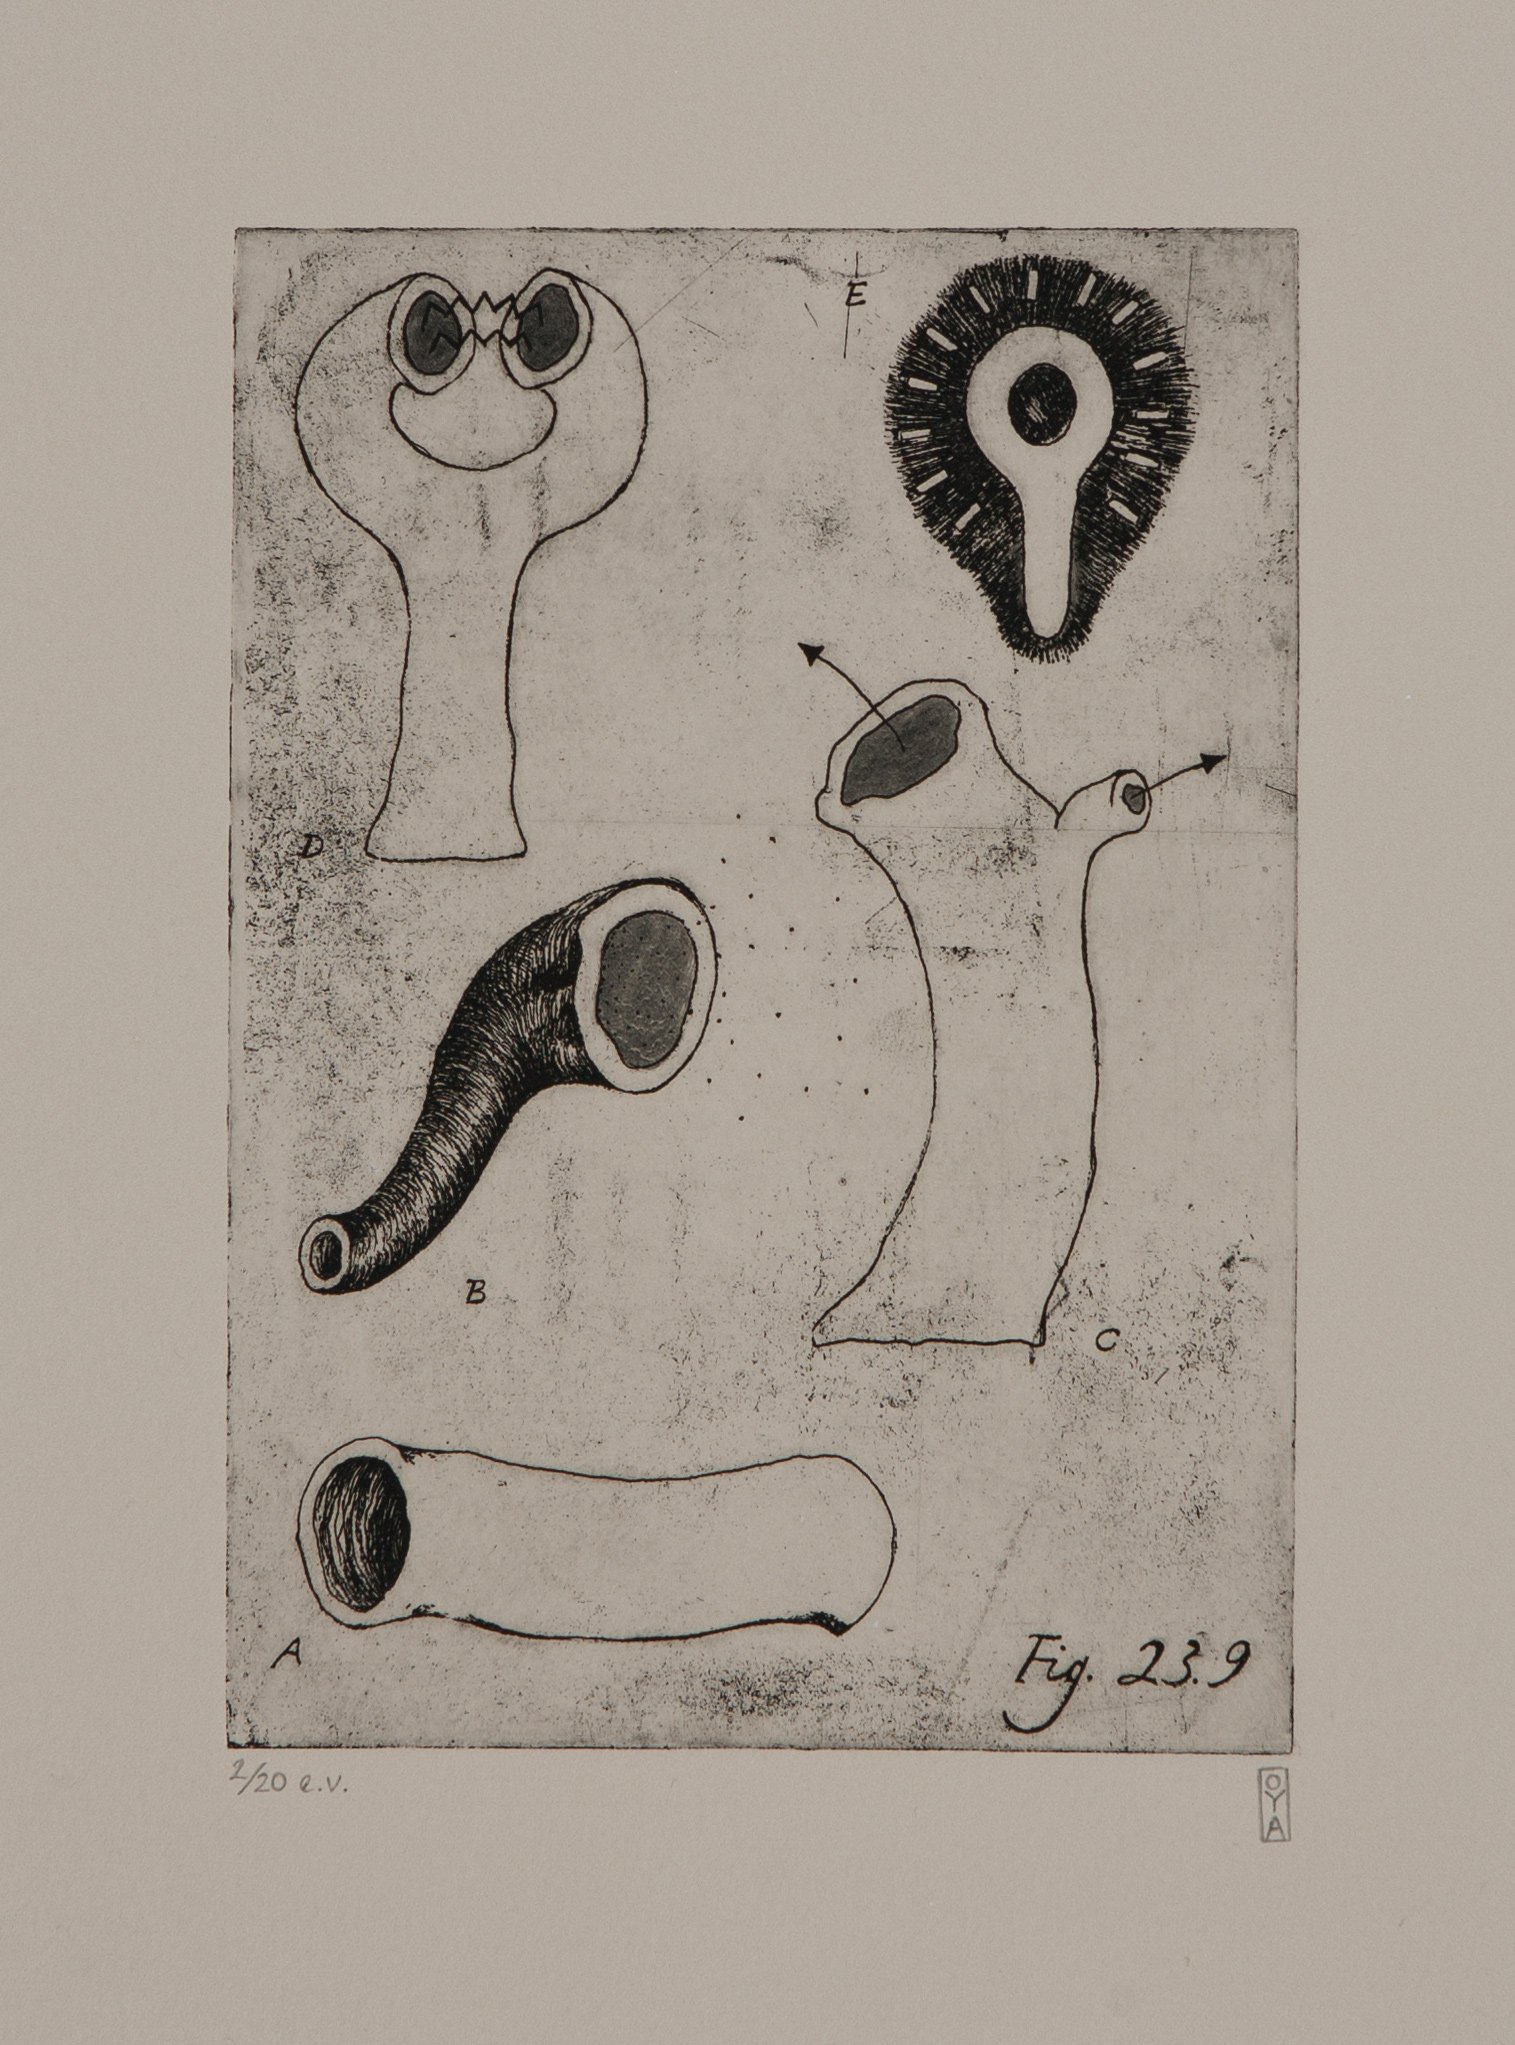    From The Book of Instant Knowledge; Fig. 23.9  , 2007, etching, varied, limited edition of 20 